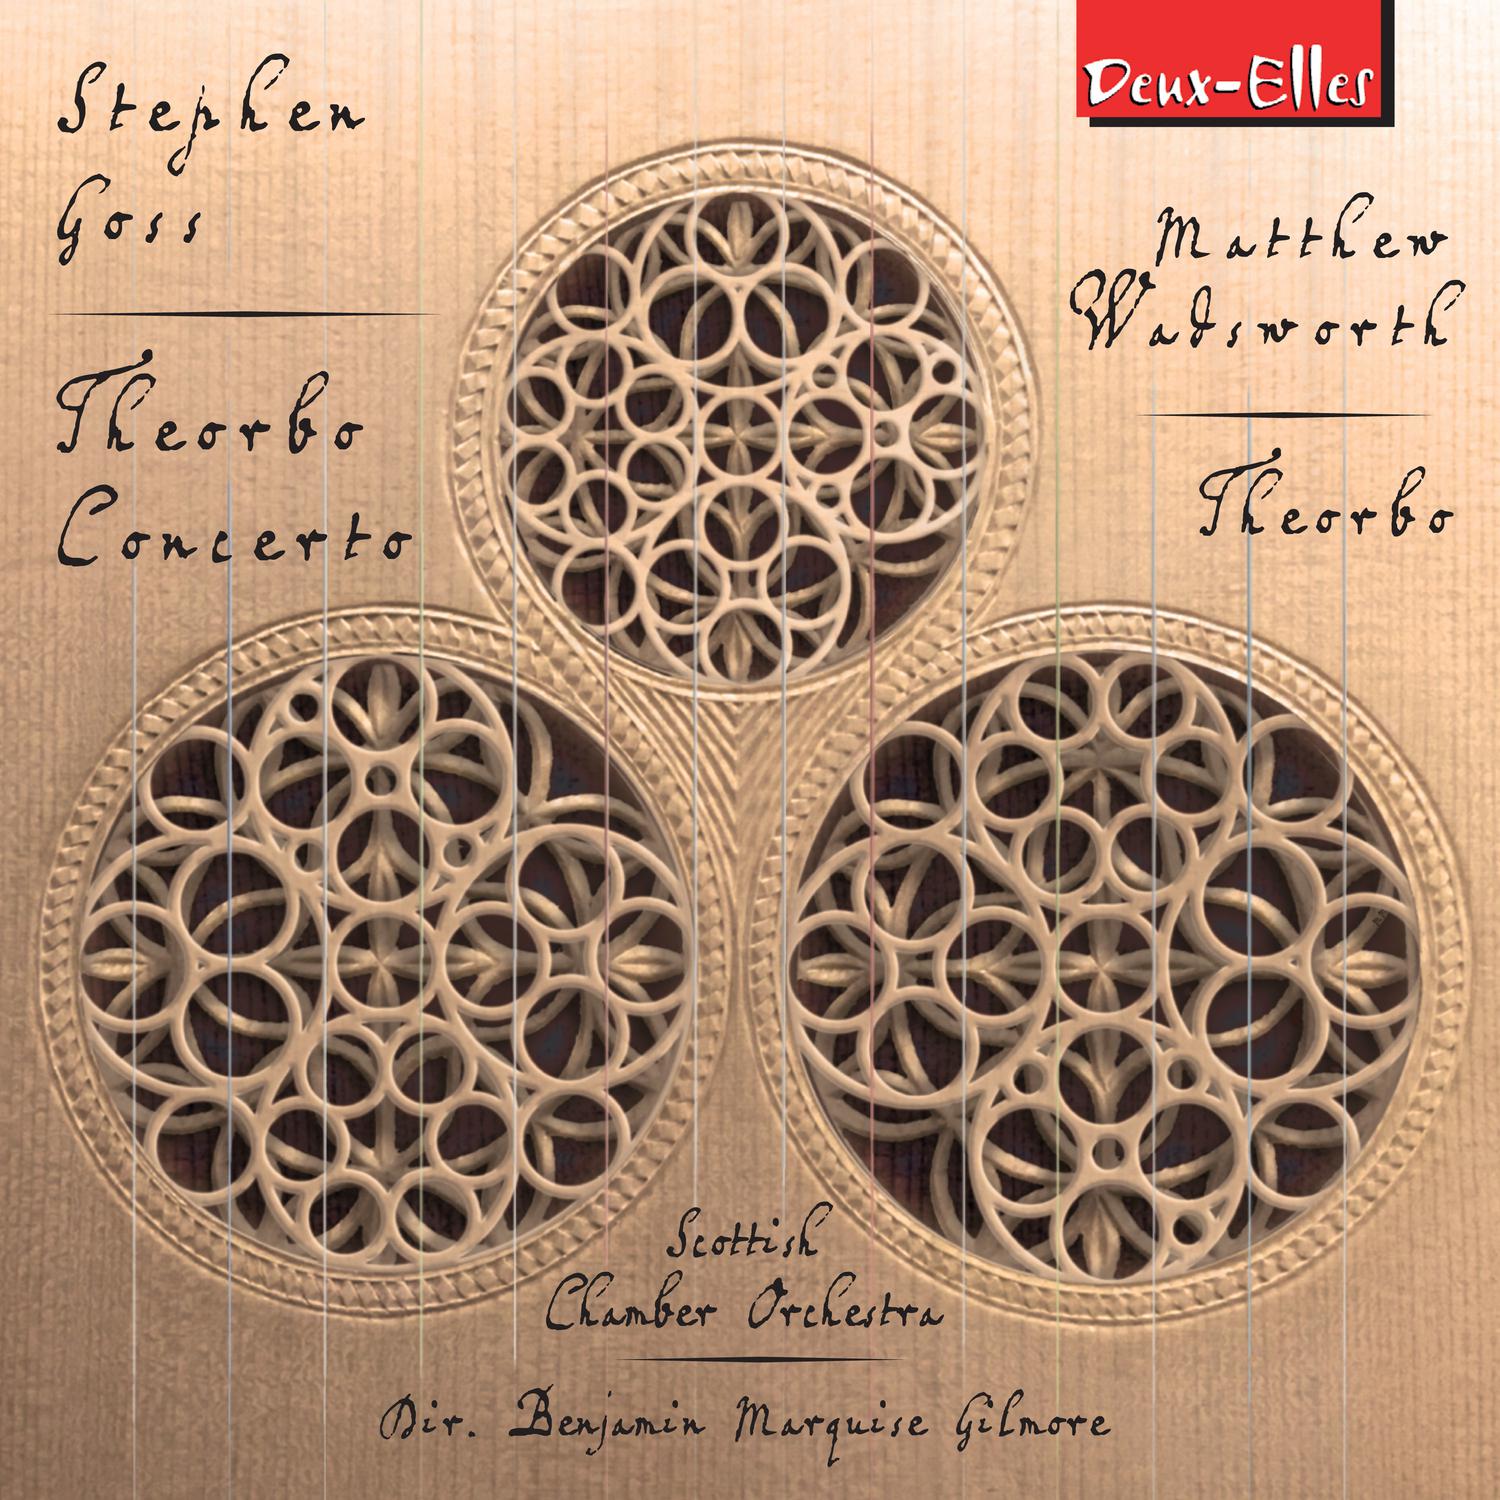 Theorbo Concerto: IV. Finale